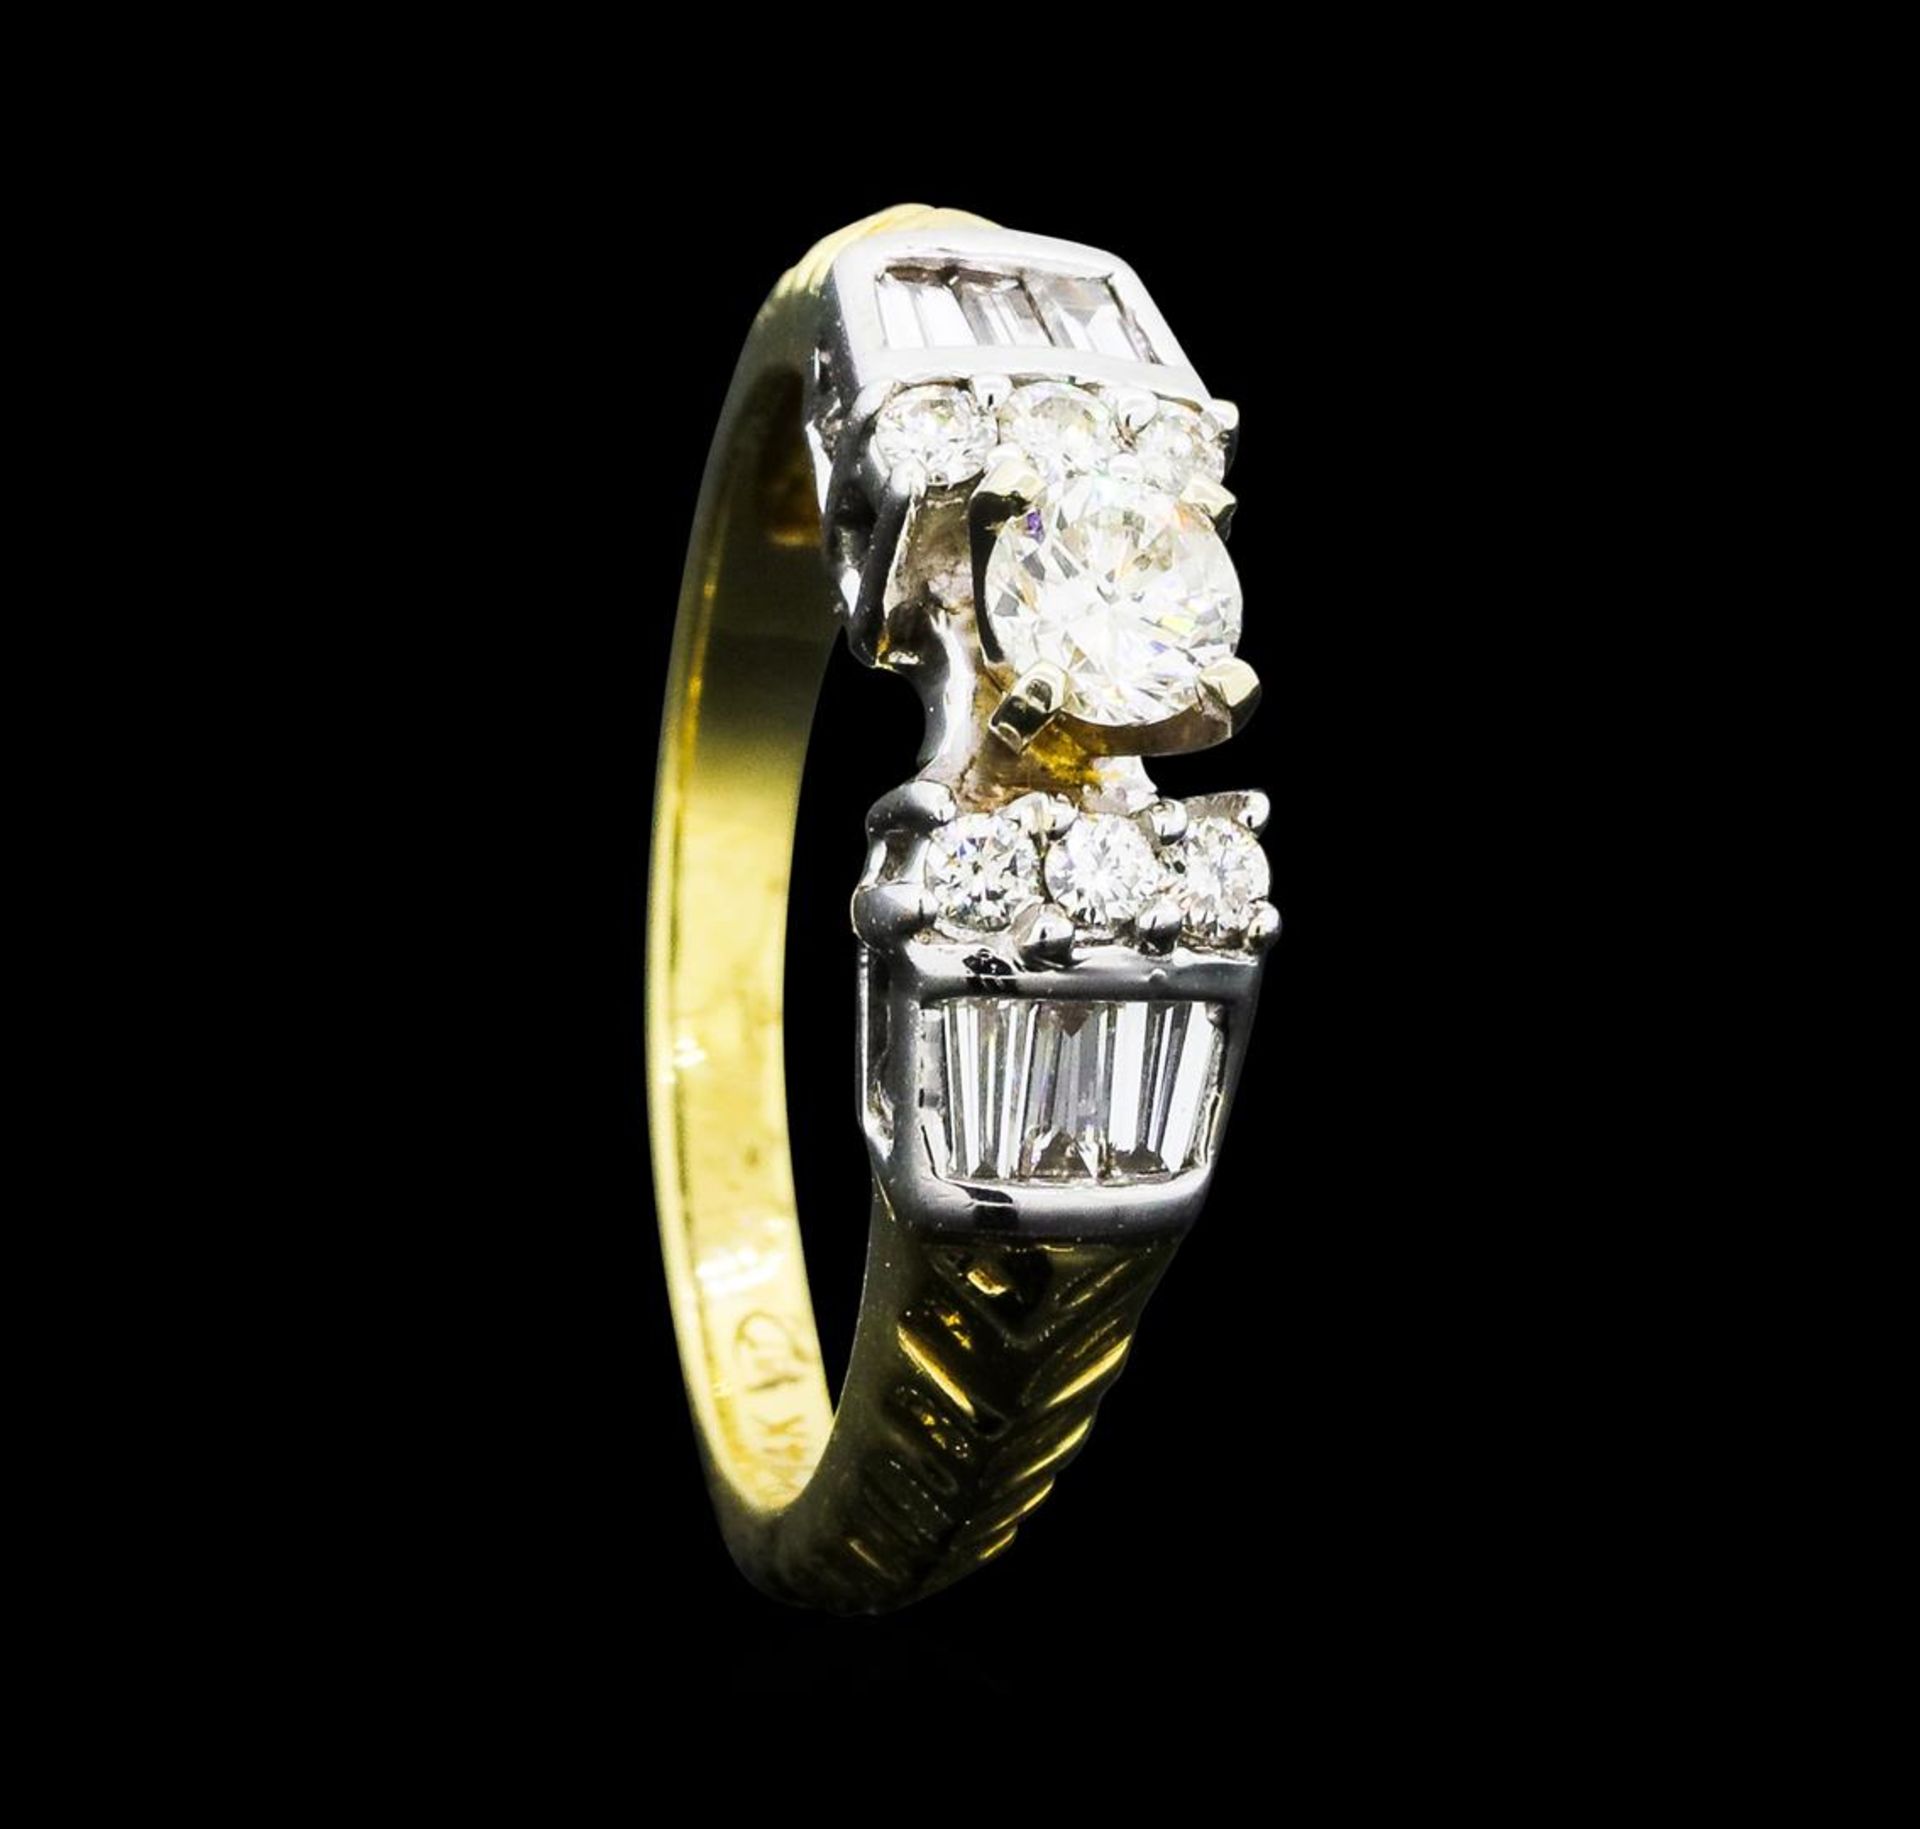 0.64 ctw Diamond Ring - 14KT Yellow And White Gold - Image 4 of 5